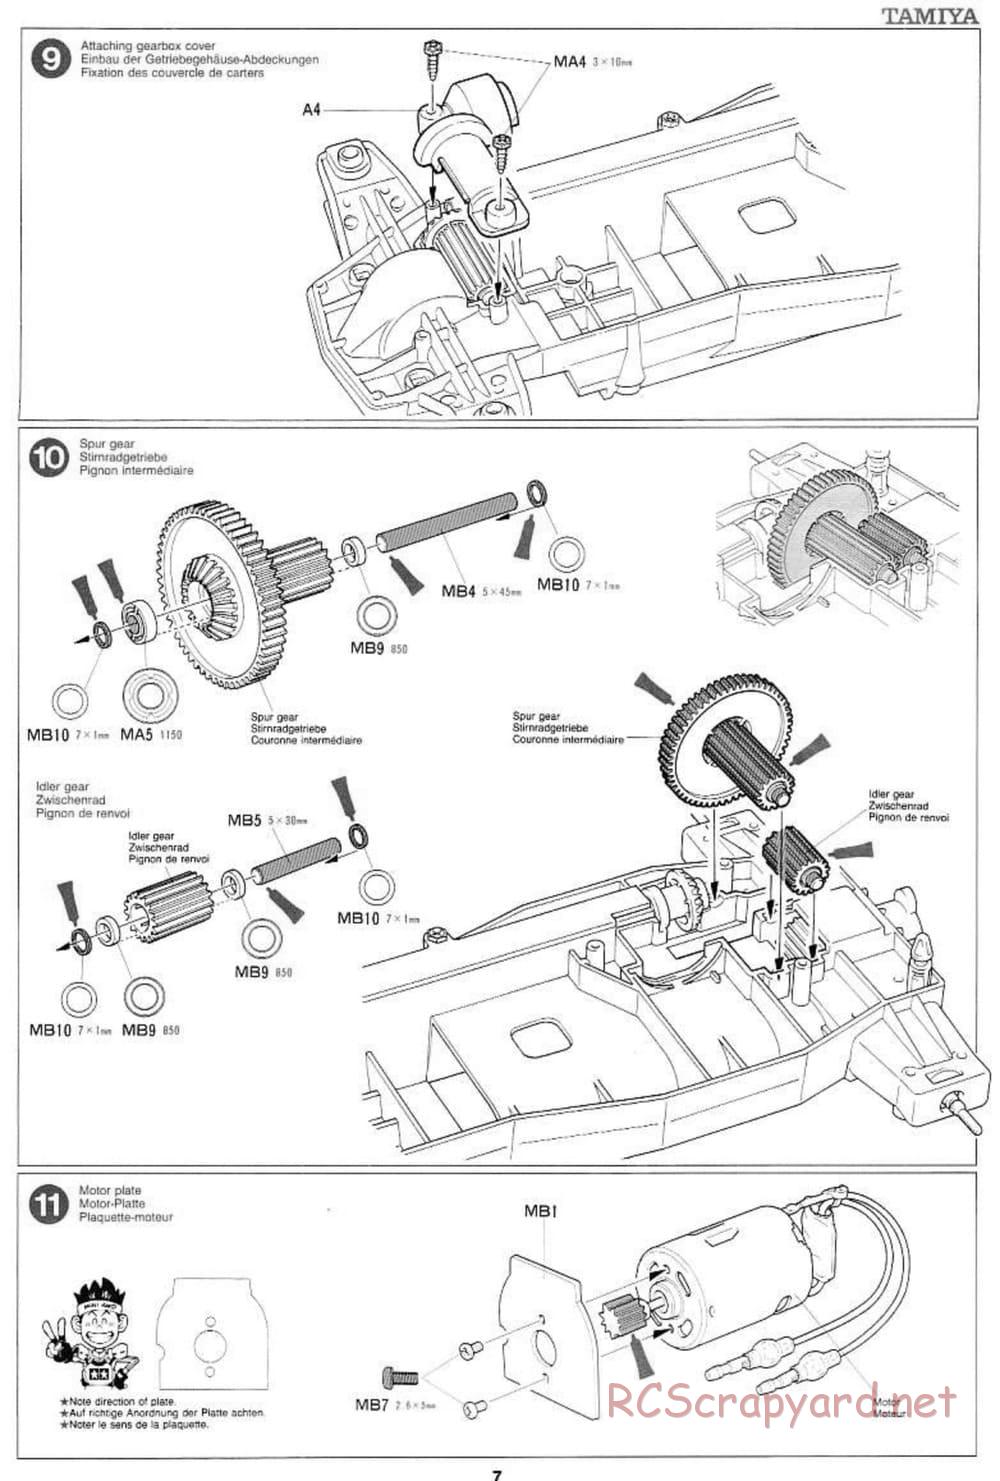 Tamiya - Wild Ceptor - Boy's 4WD Chassis - Manual - Page 7